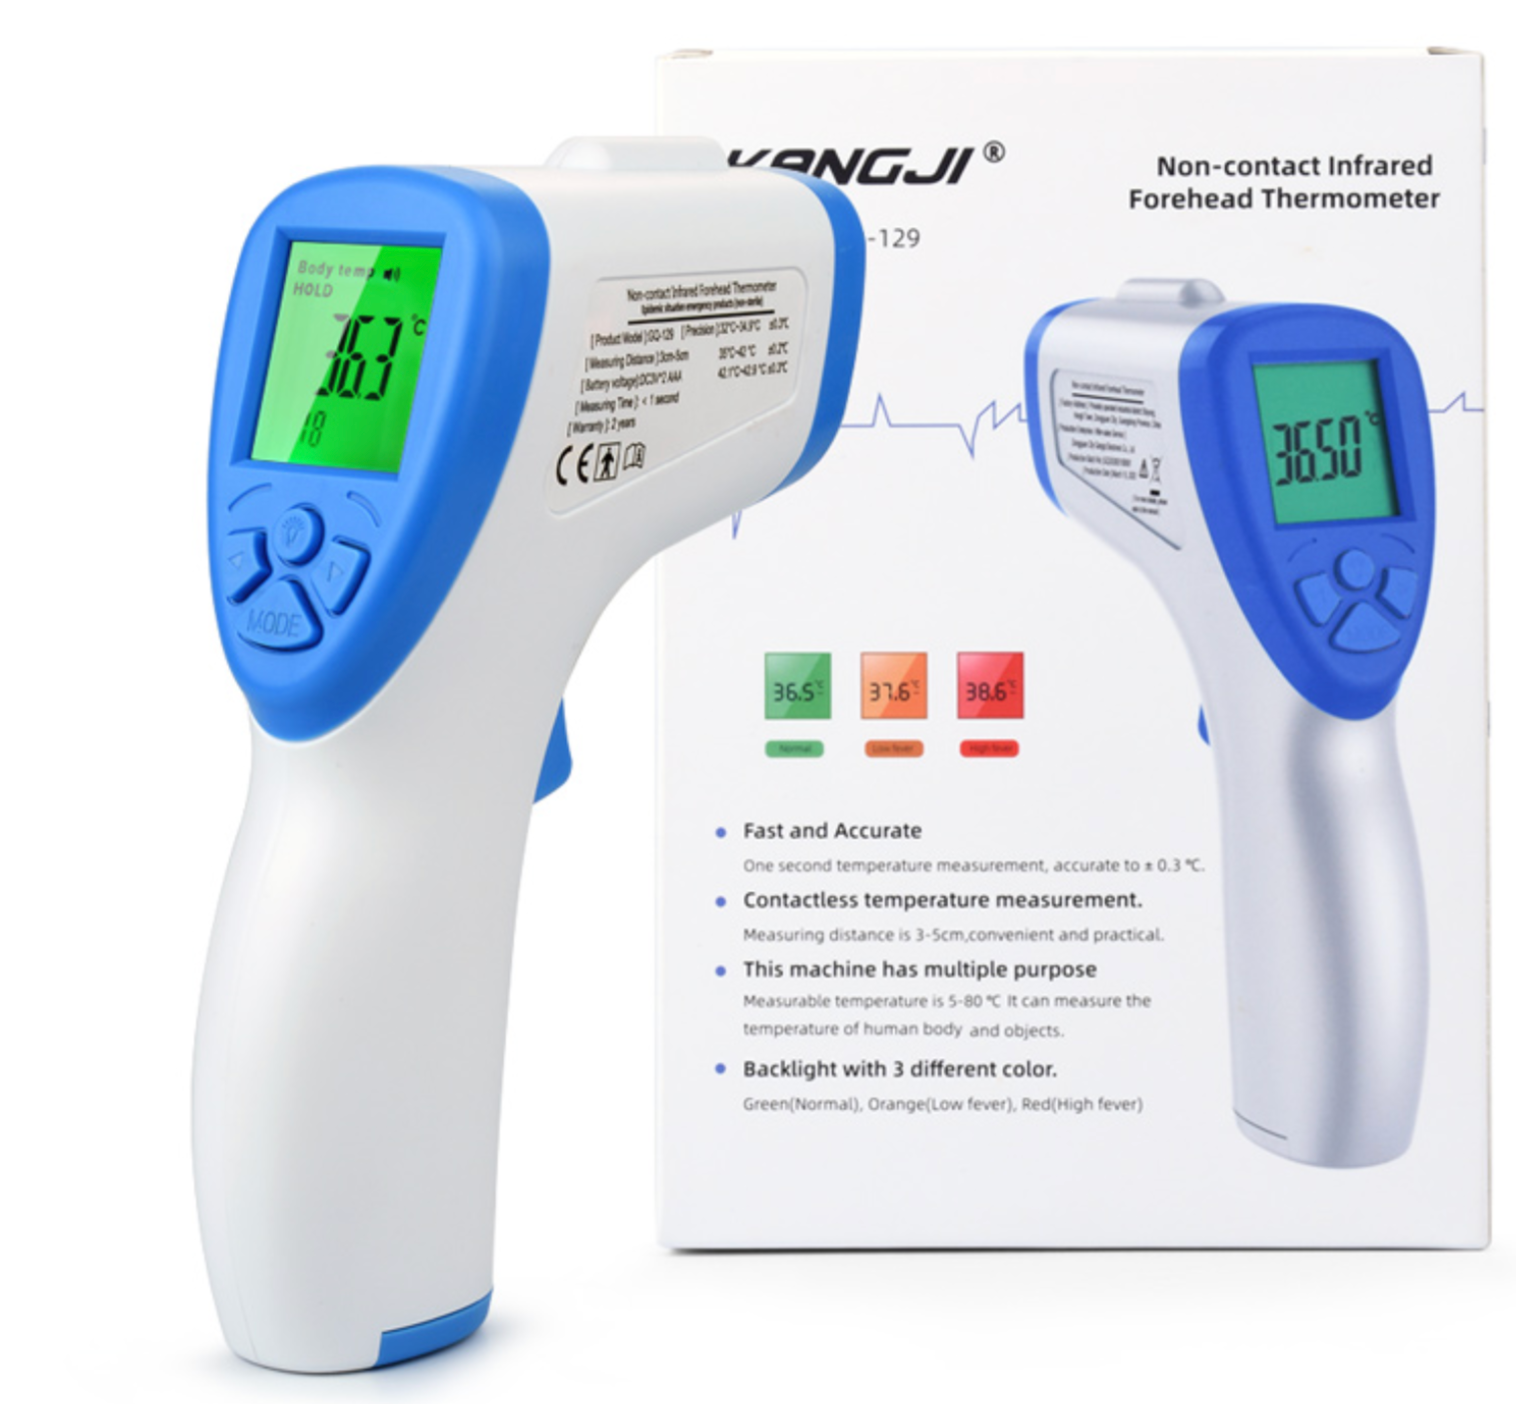 Non-Contact Infrared Thermometer: Reliable, Convenient, and Hassle